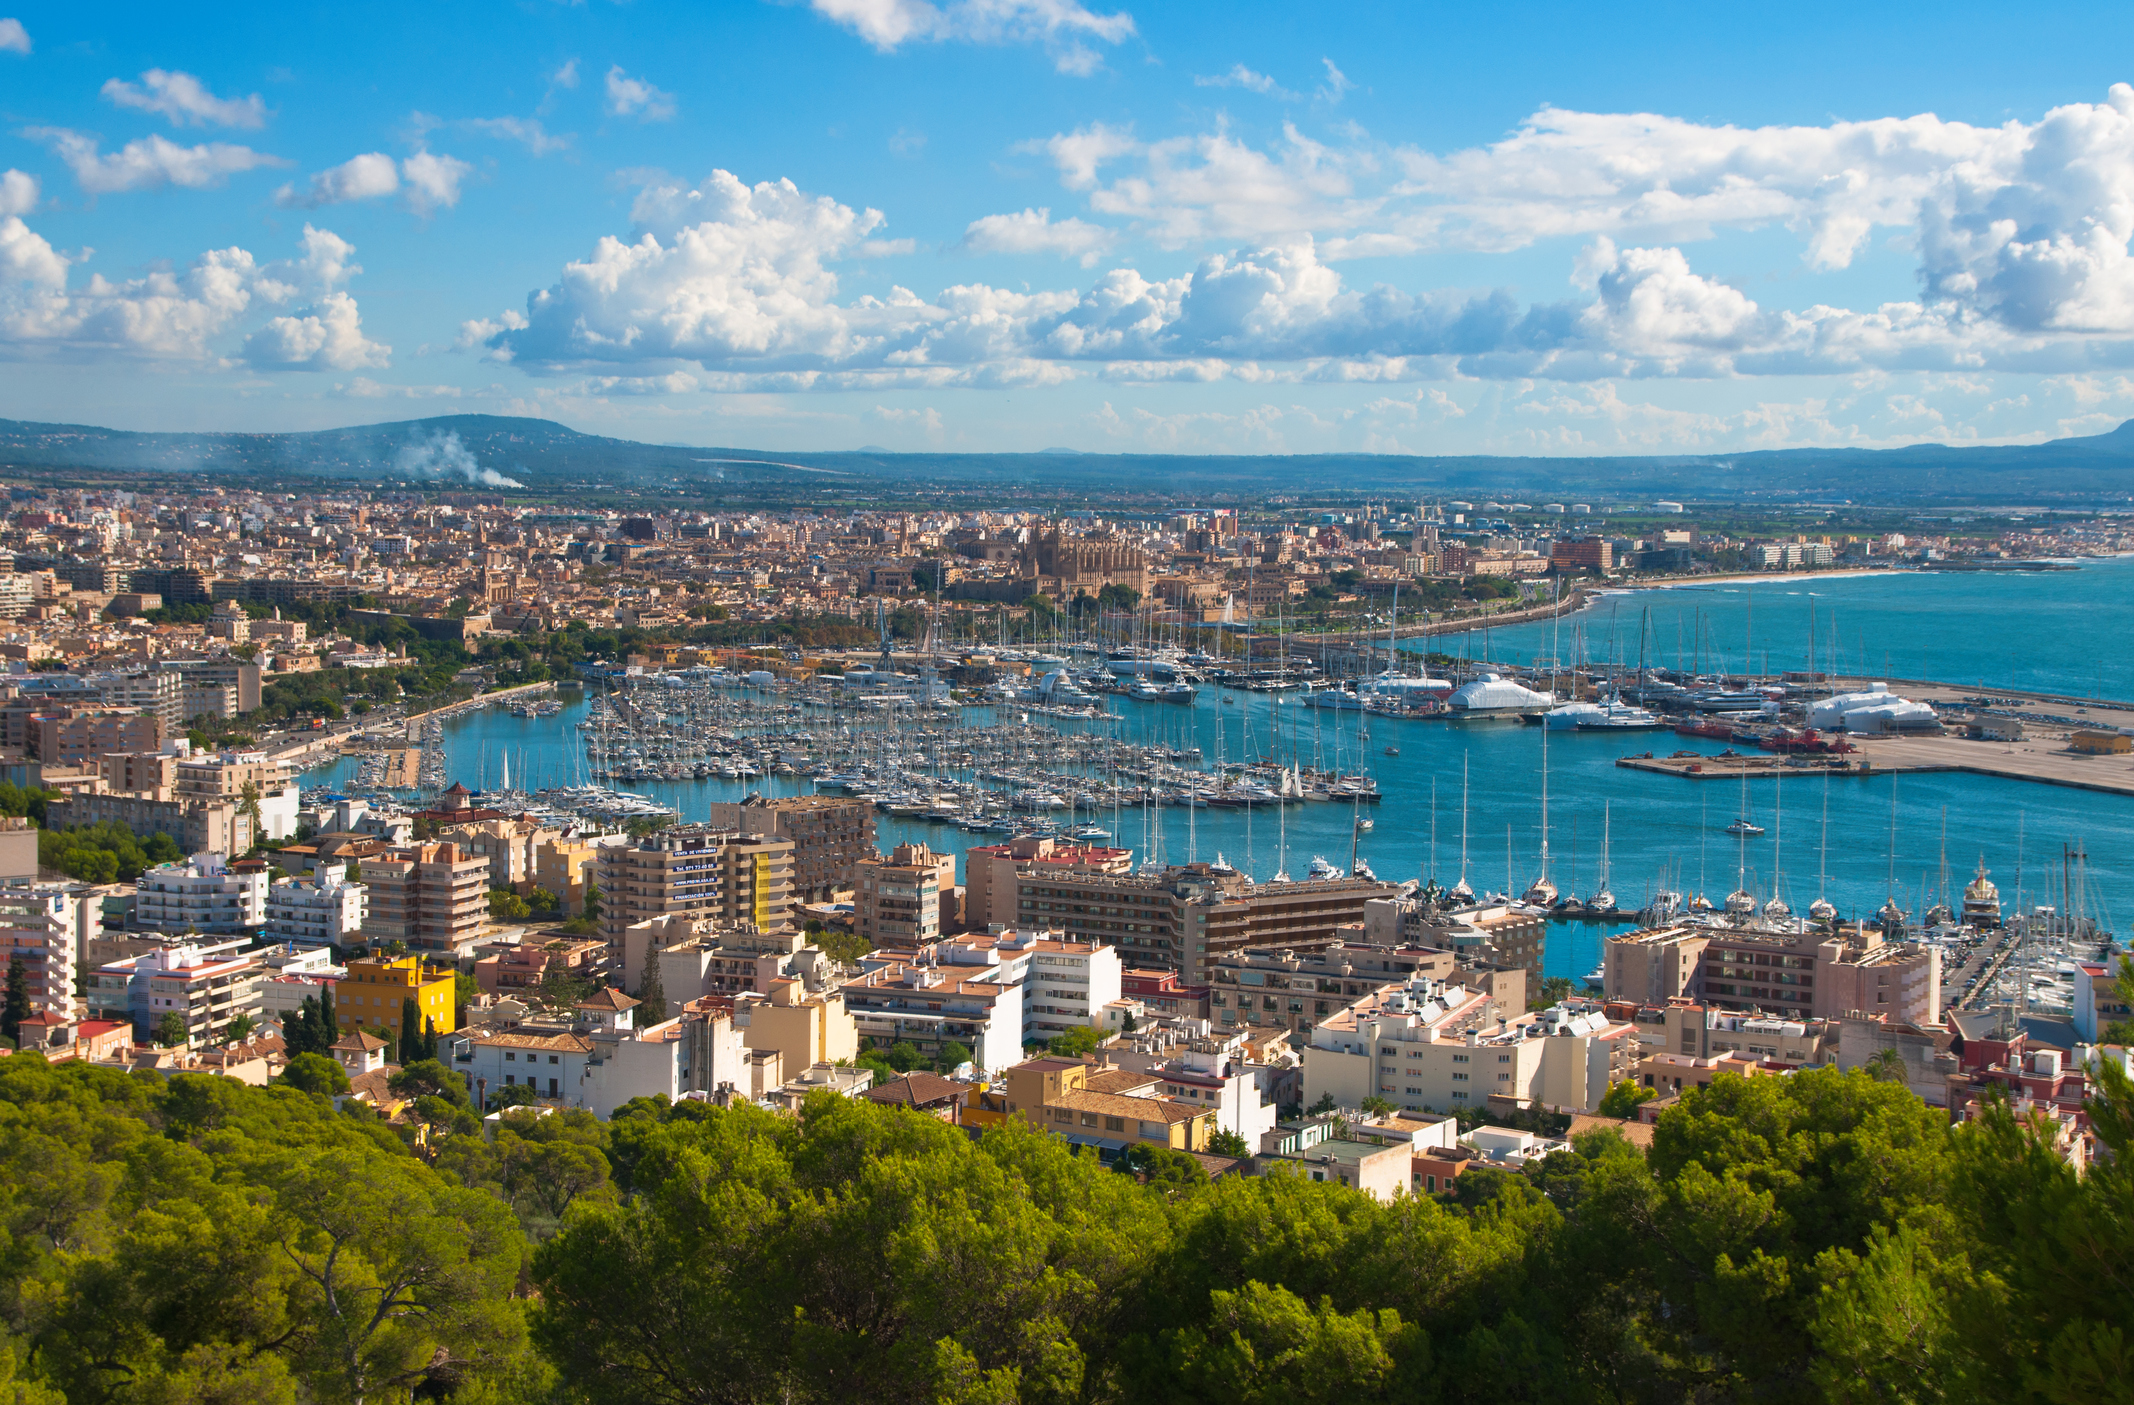 Palma the resort city and capital of the Spanish island of Mallorca has passed a law banning short-term rentals in the city